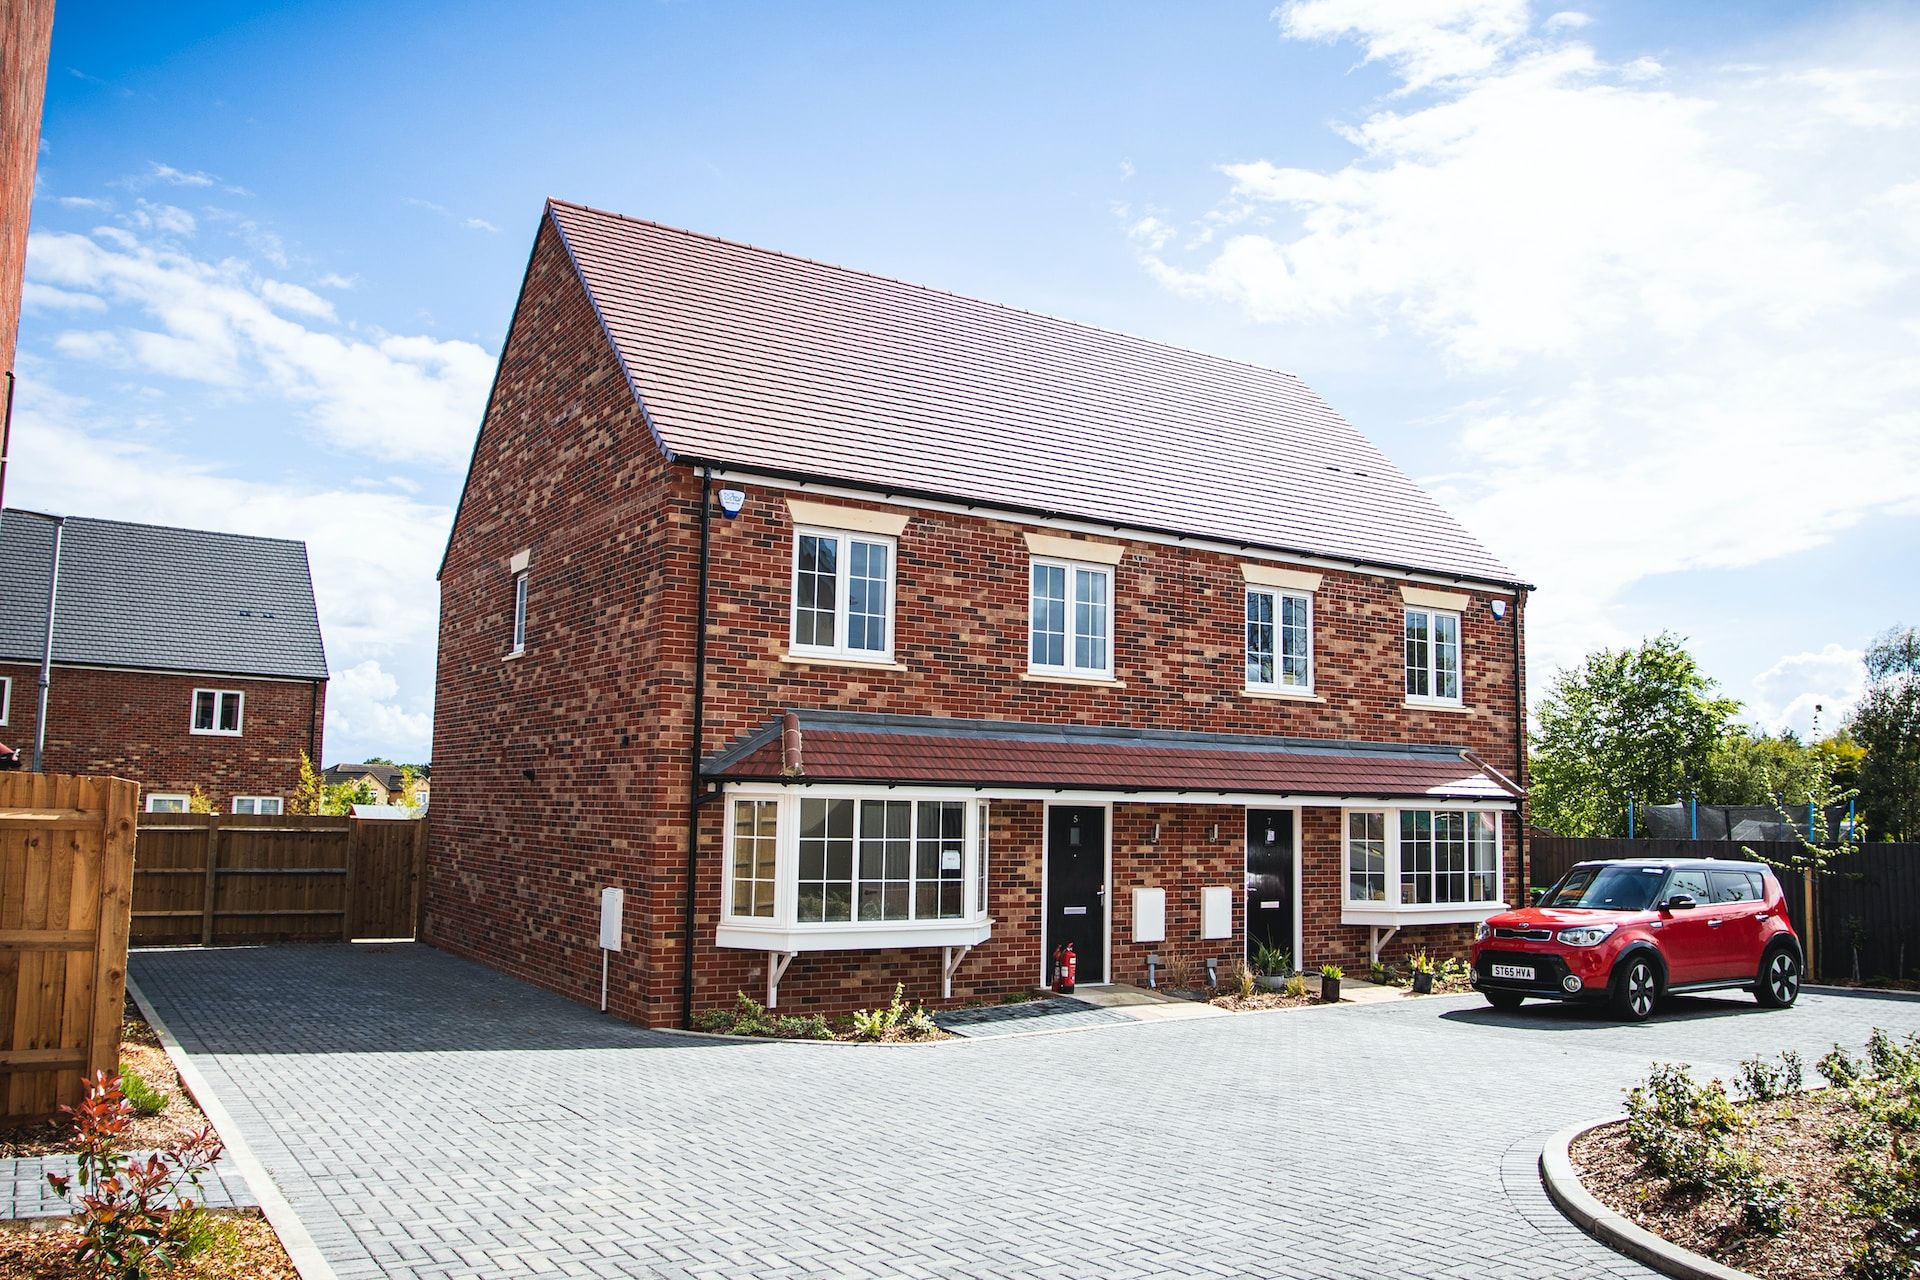 A brand new housing estate in Bedford UK. Filled with 3, 4 and 5-bed homes, via James Feaver